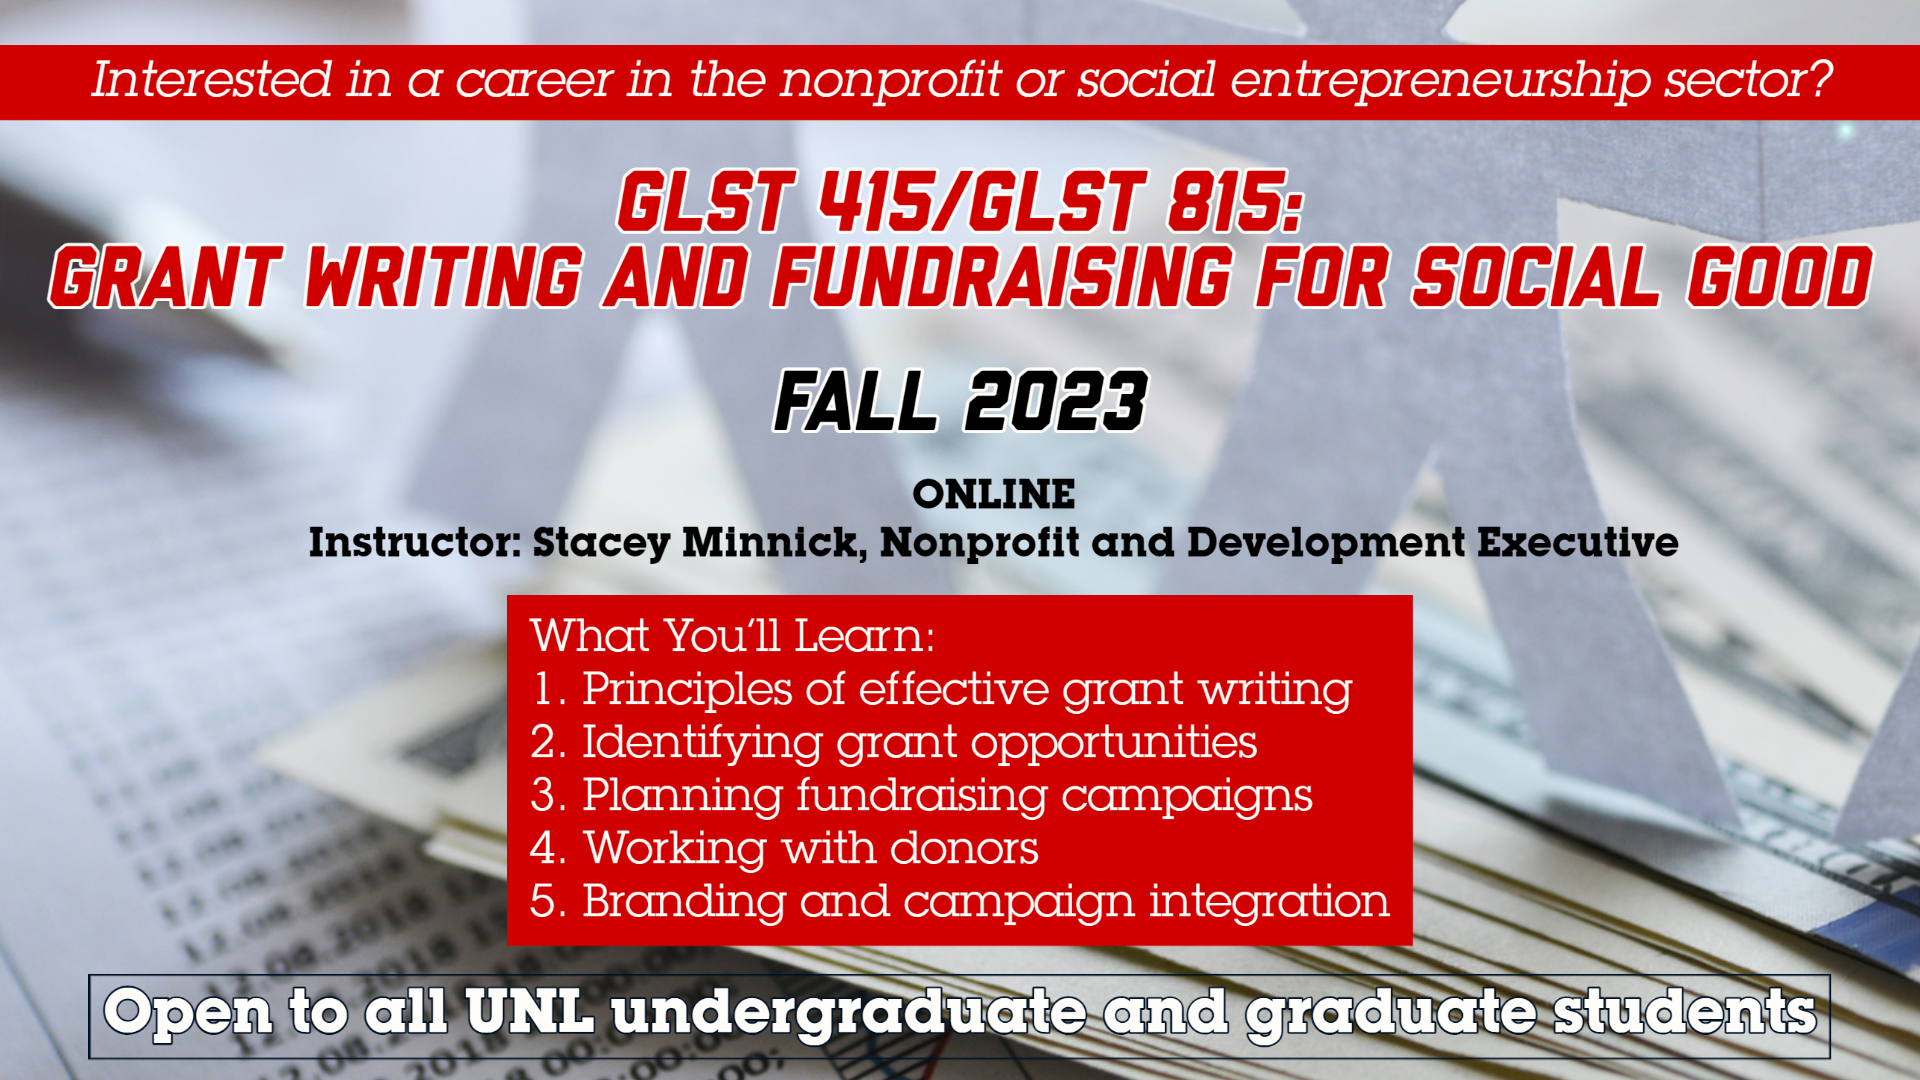 New Course on Grant Writing and Fundraising this Fall